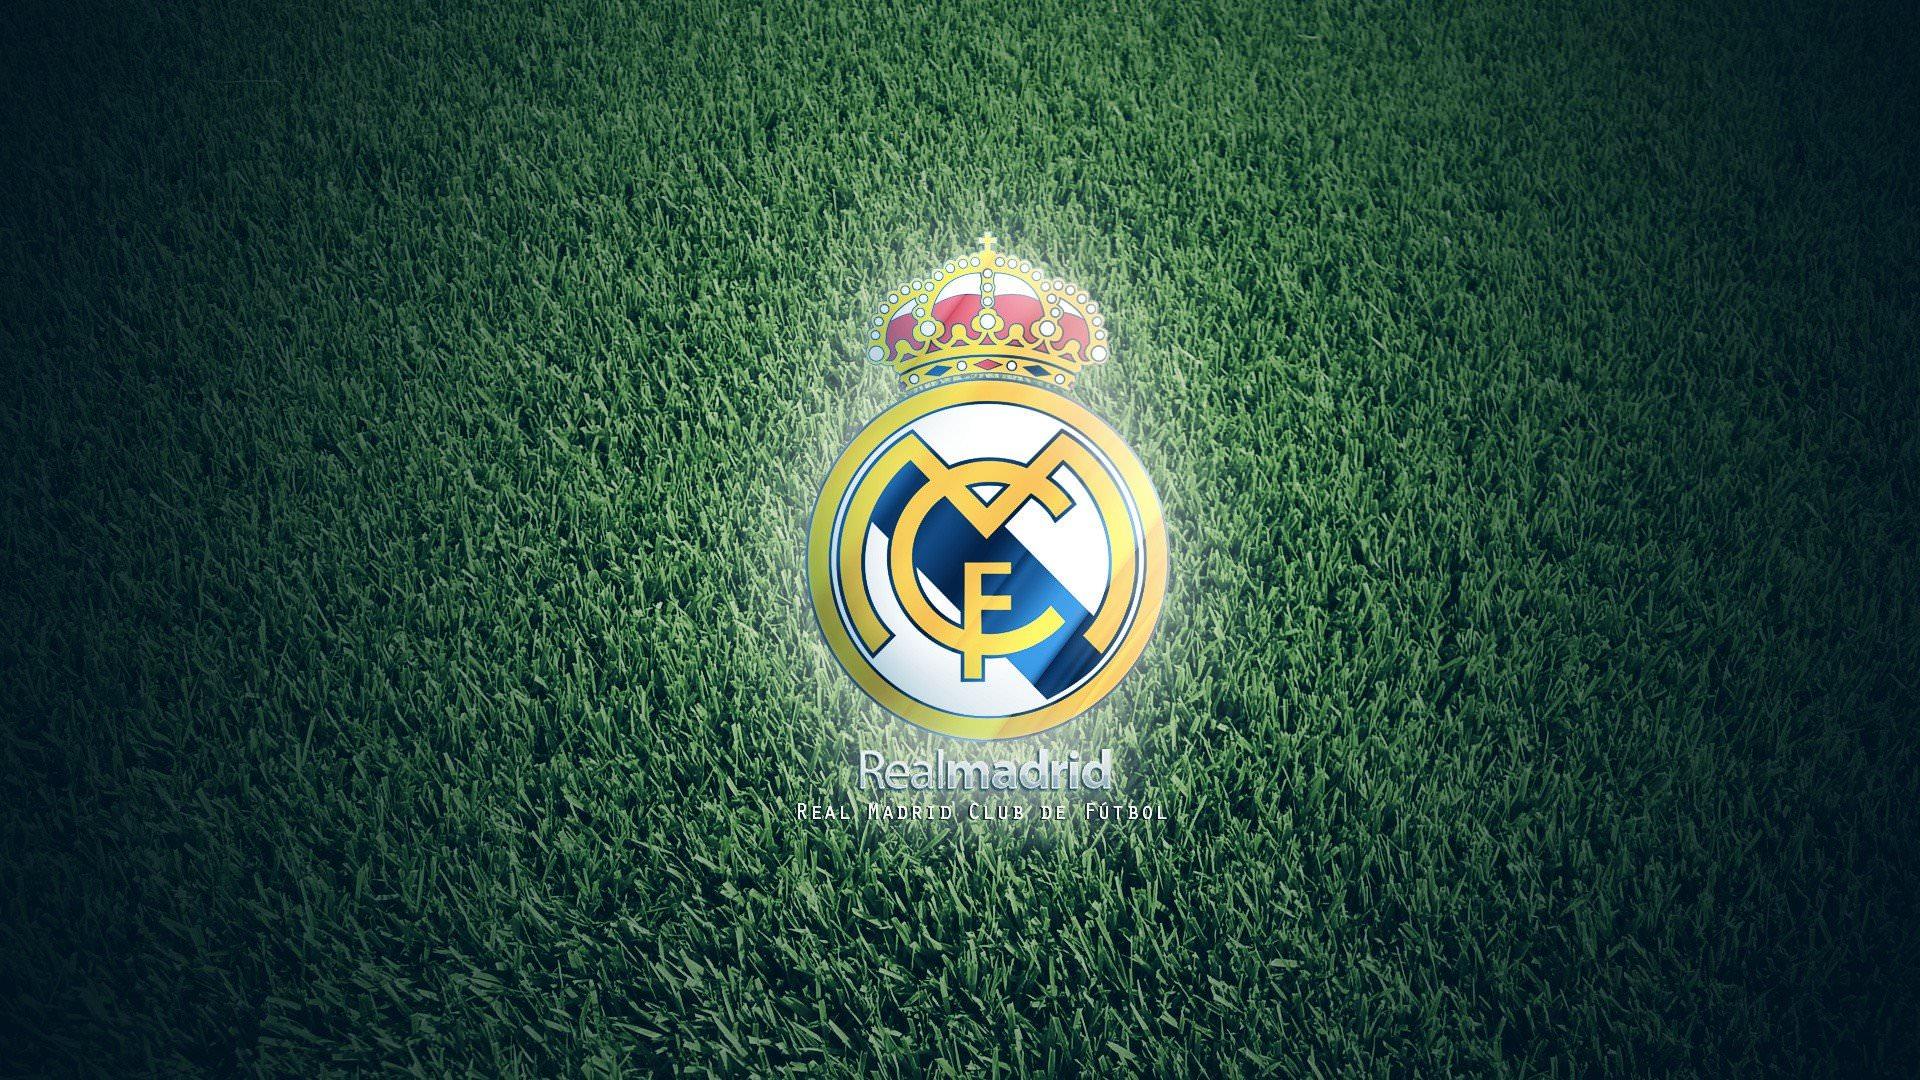 Awesome Real Madrid C.F. free wallpaper for full HD PC